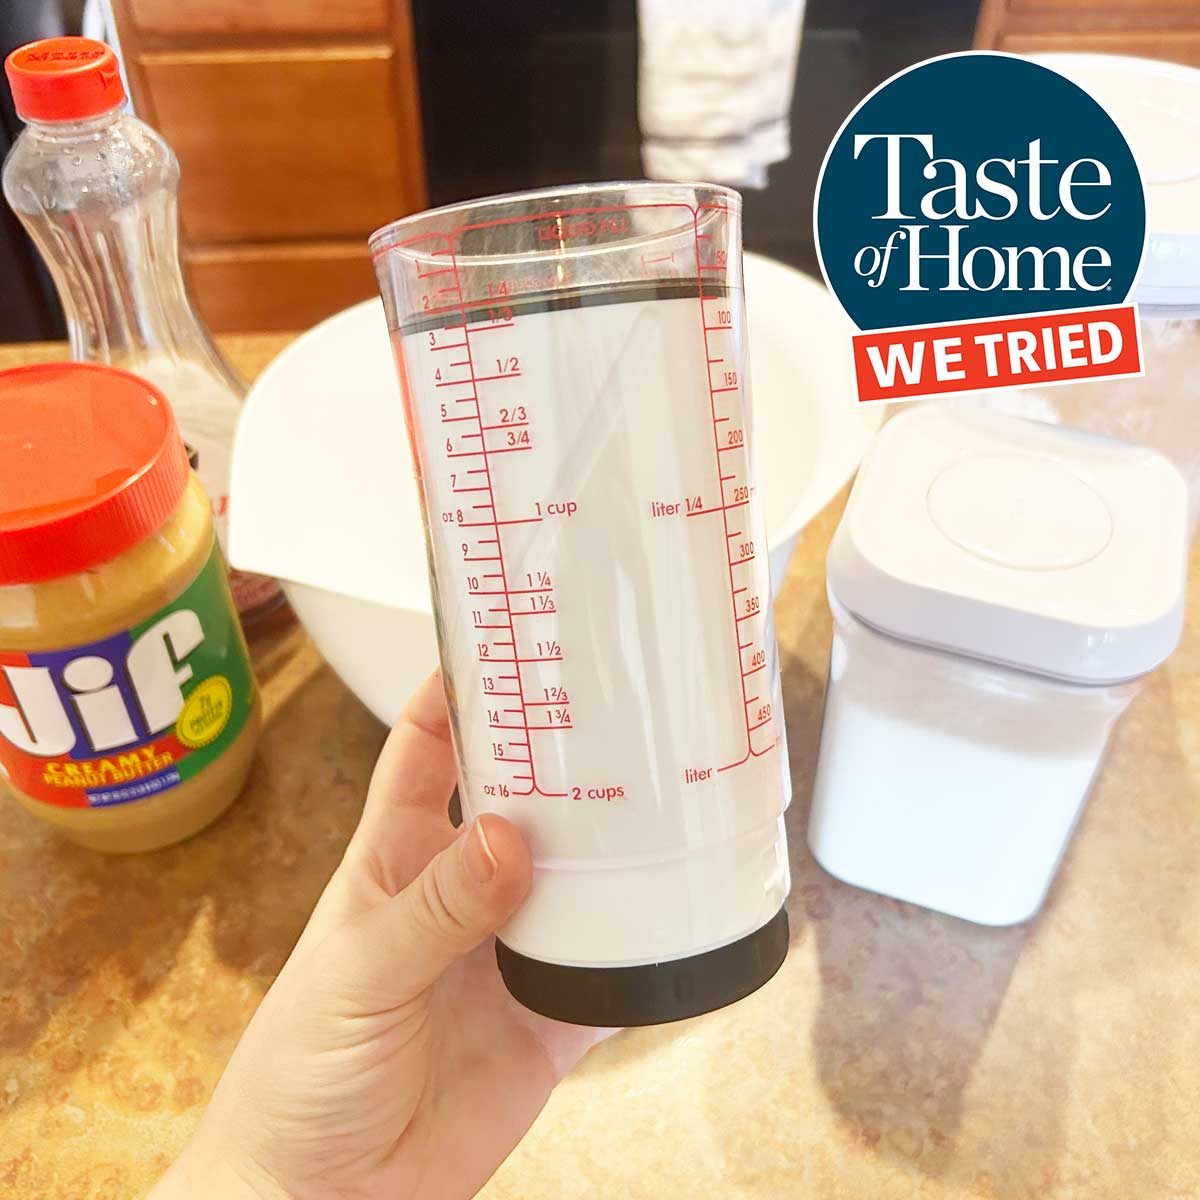 https://www.tasteofhome.com/wp-content/uploads/2023/06/TOH-We-Tried-measuring-cup-ecomm.jpg